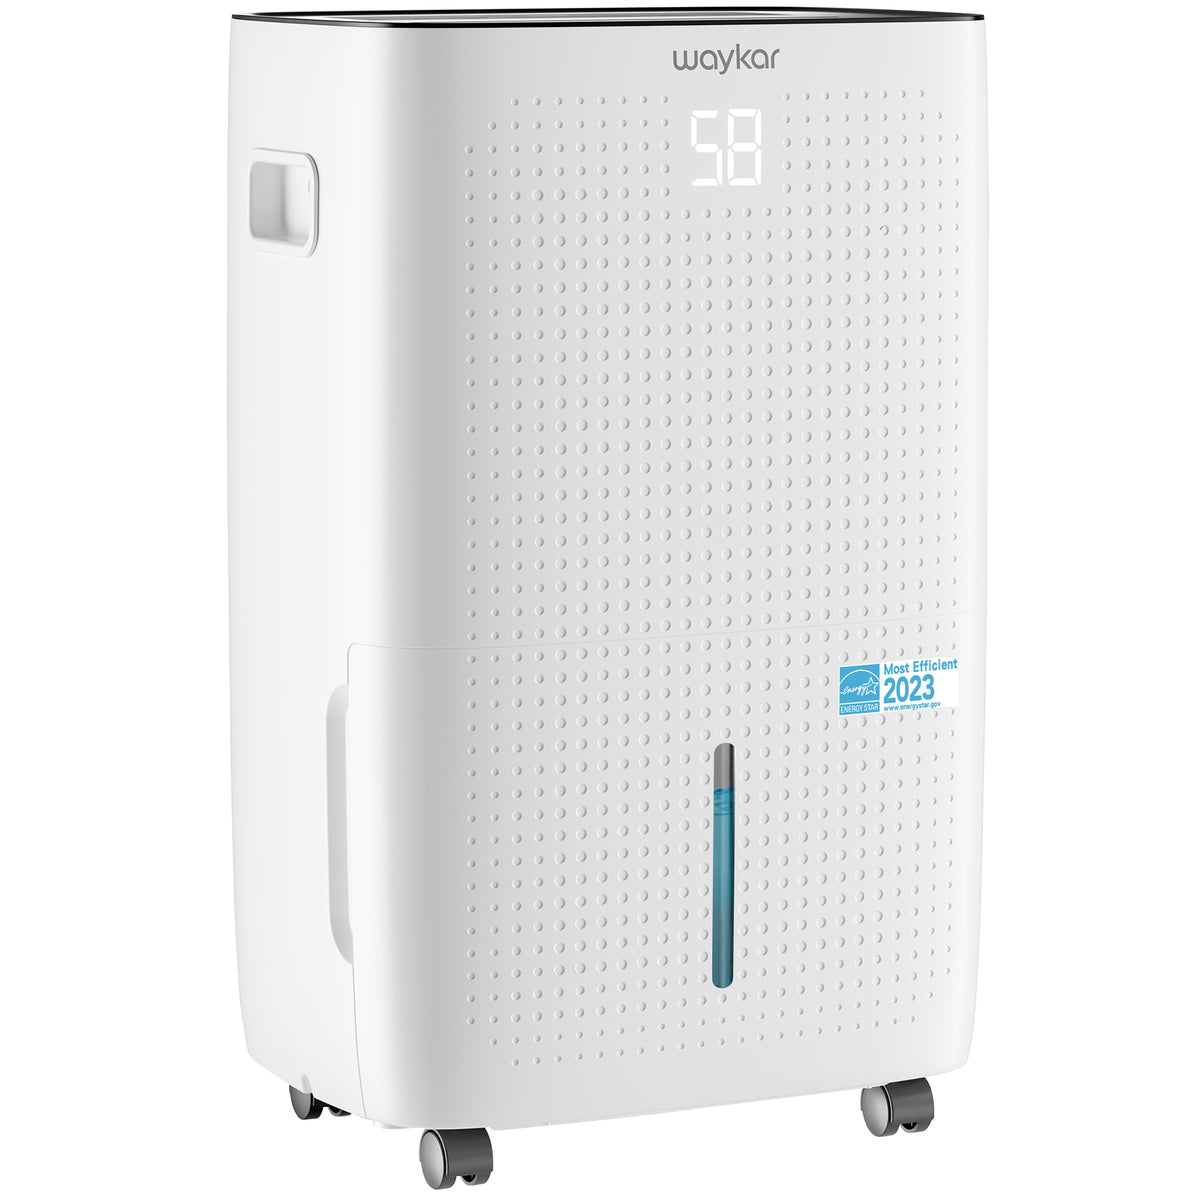 Waykar 150 Pints 7,000 Sq. Ft ENERGY STAR Most Efficient Dehumidifier with Pump for Commercial and Industrial Large Room, Warehouse, Storage, Home, Basement with Drain Hose